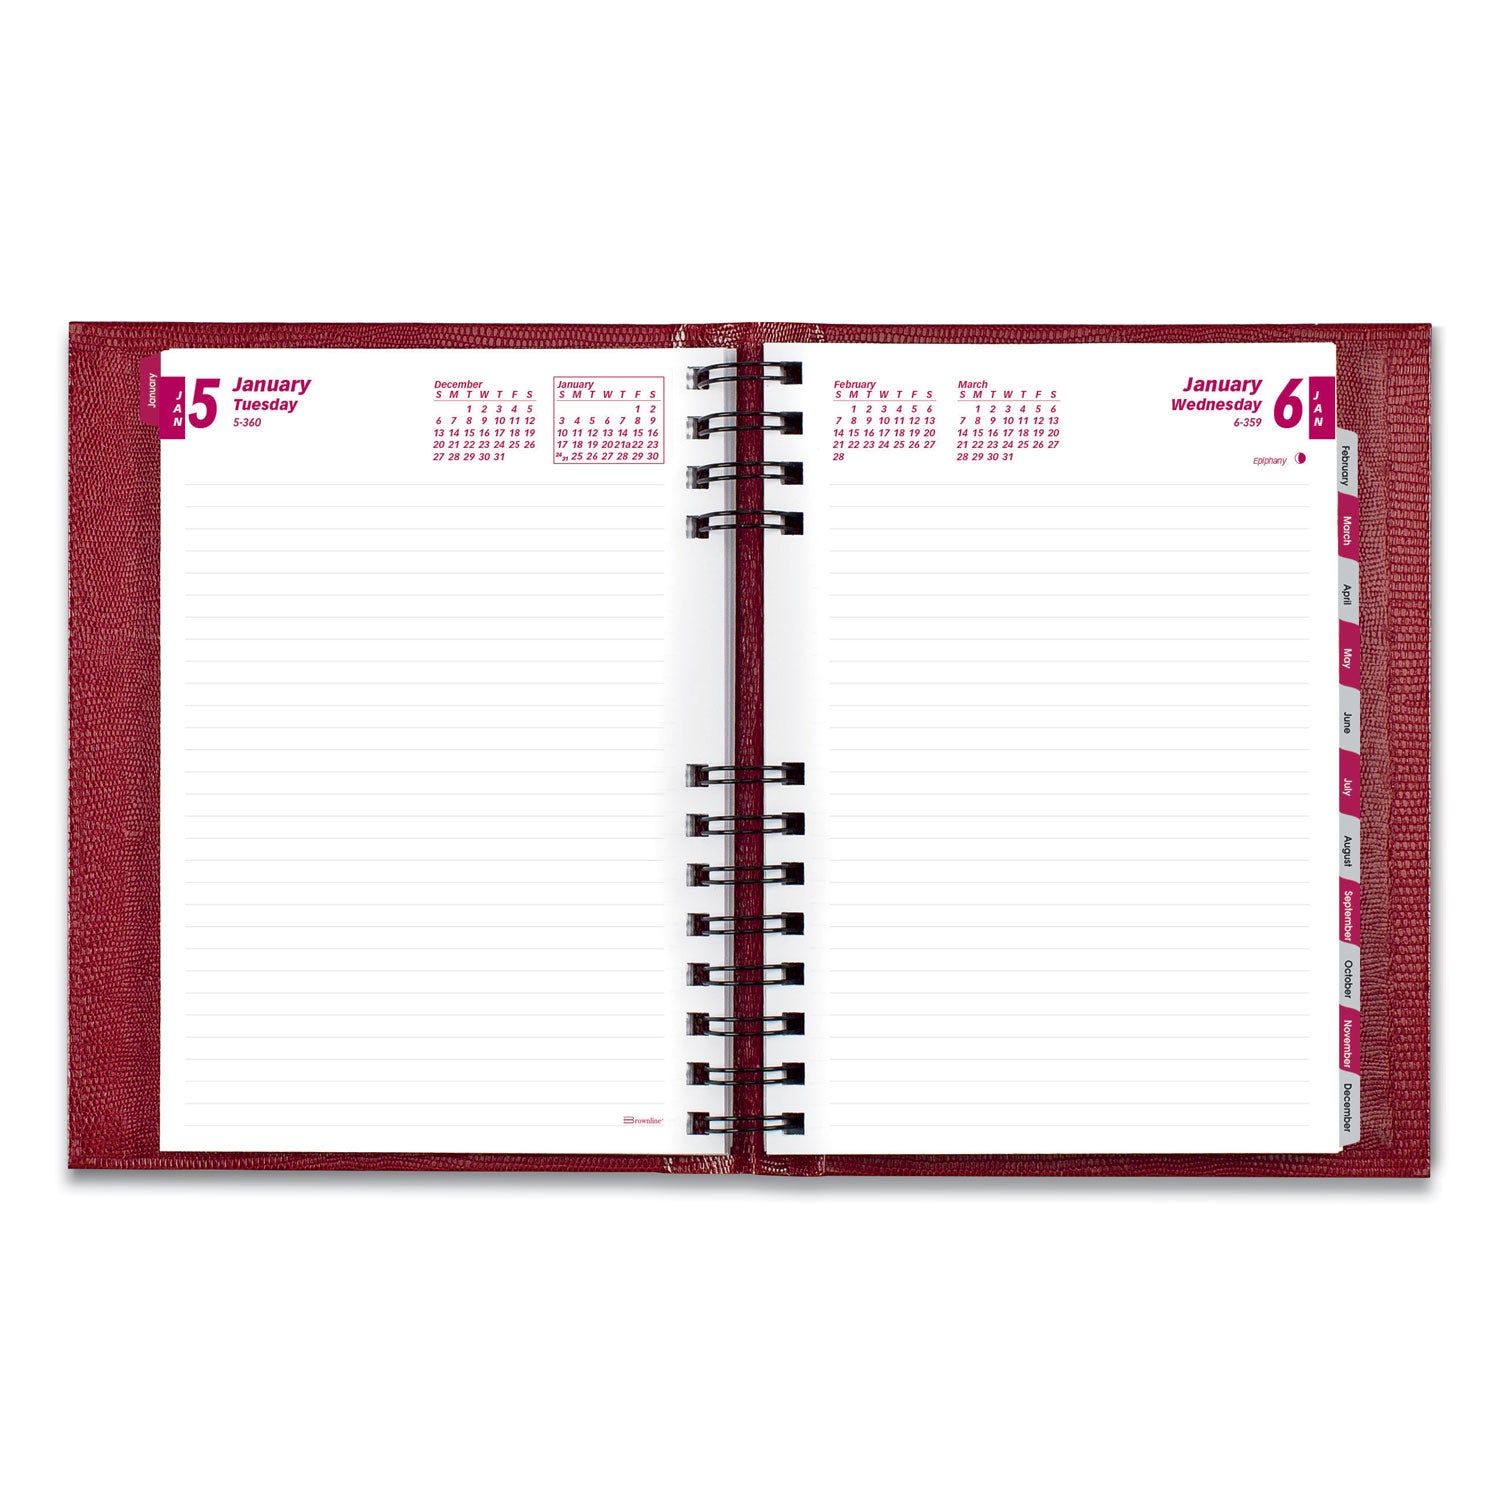 coilpro-ruled-daily-planner-825-x-575-red-cover-12-month-jan-to-dec-2024_redcb389cred - 2